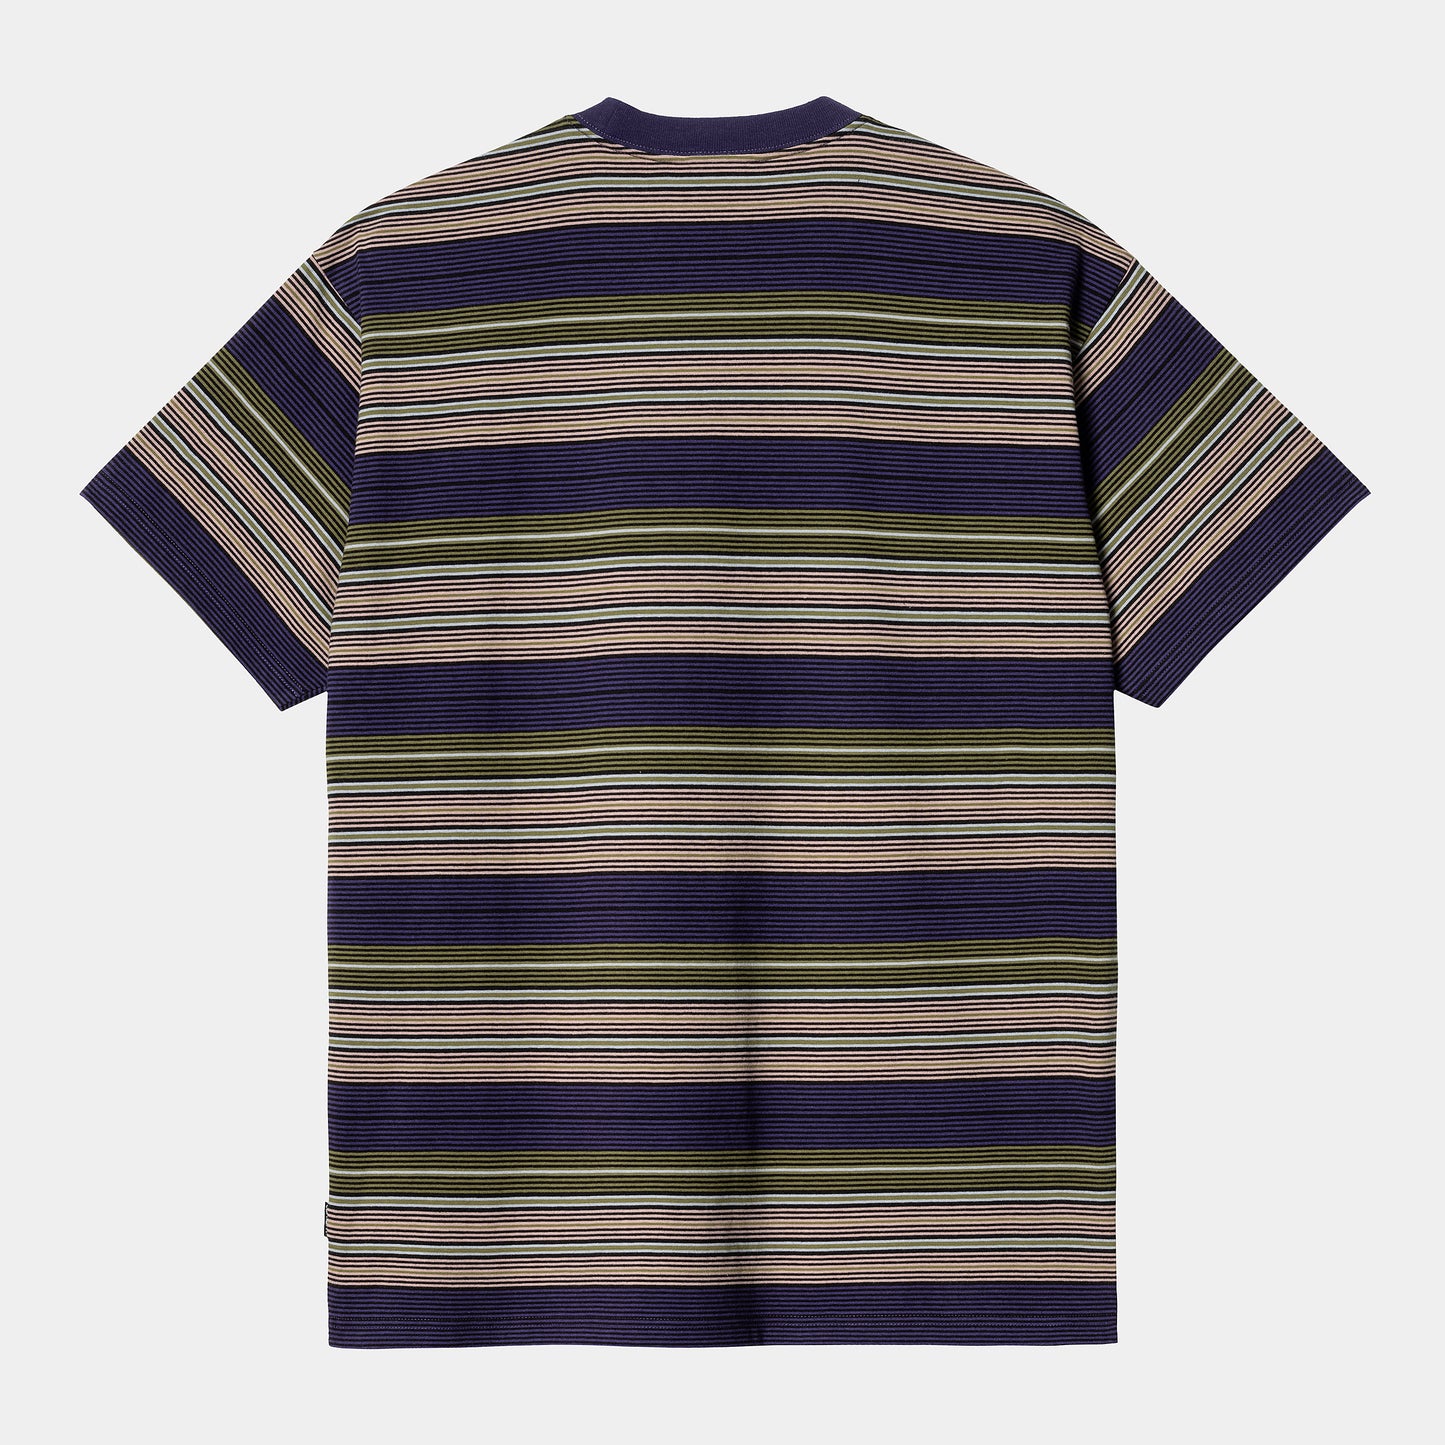 CARHARTT WIP S/S COBY T-Shirt - Colby Stripe Tyrian